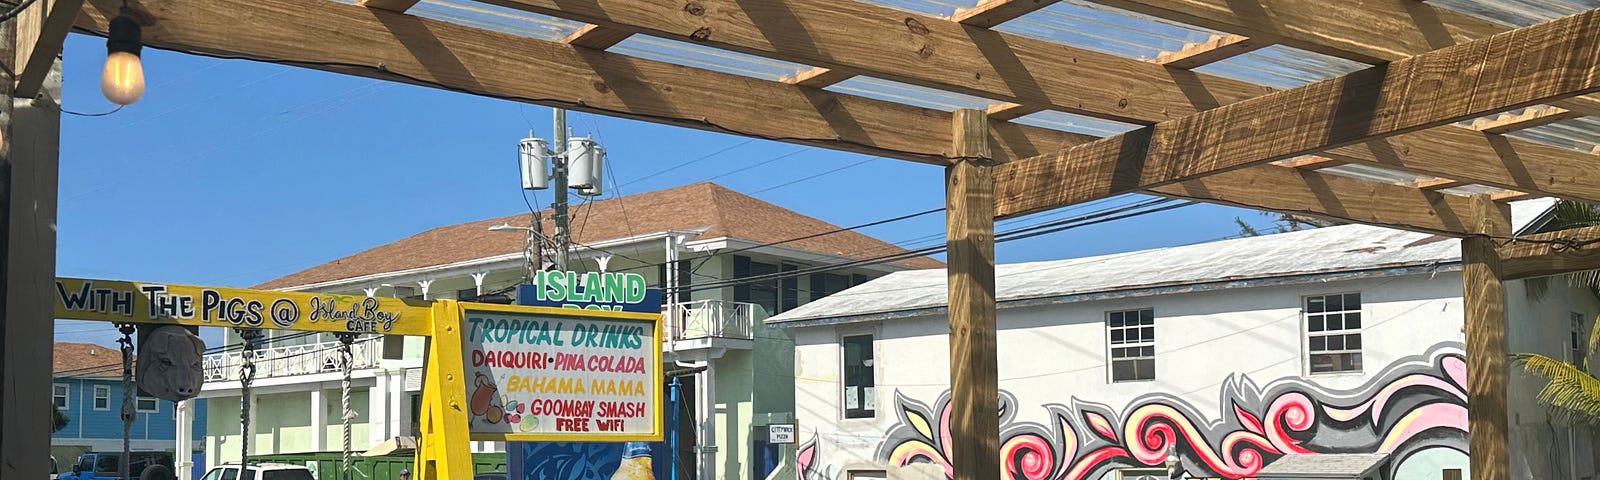 Wood pergola over picnic tables and chairs. A yellow sign — “Island Bar” with a list of a few cocktails. A colonial-style building is at the back of the parking lot with another plain white two-story building next to it. There is pink and grey street art on the white building, that says “Heel 2 Toe”